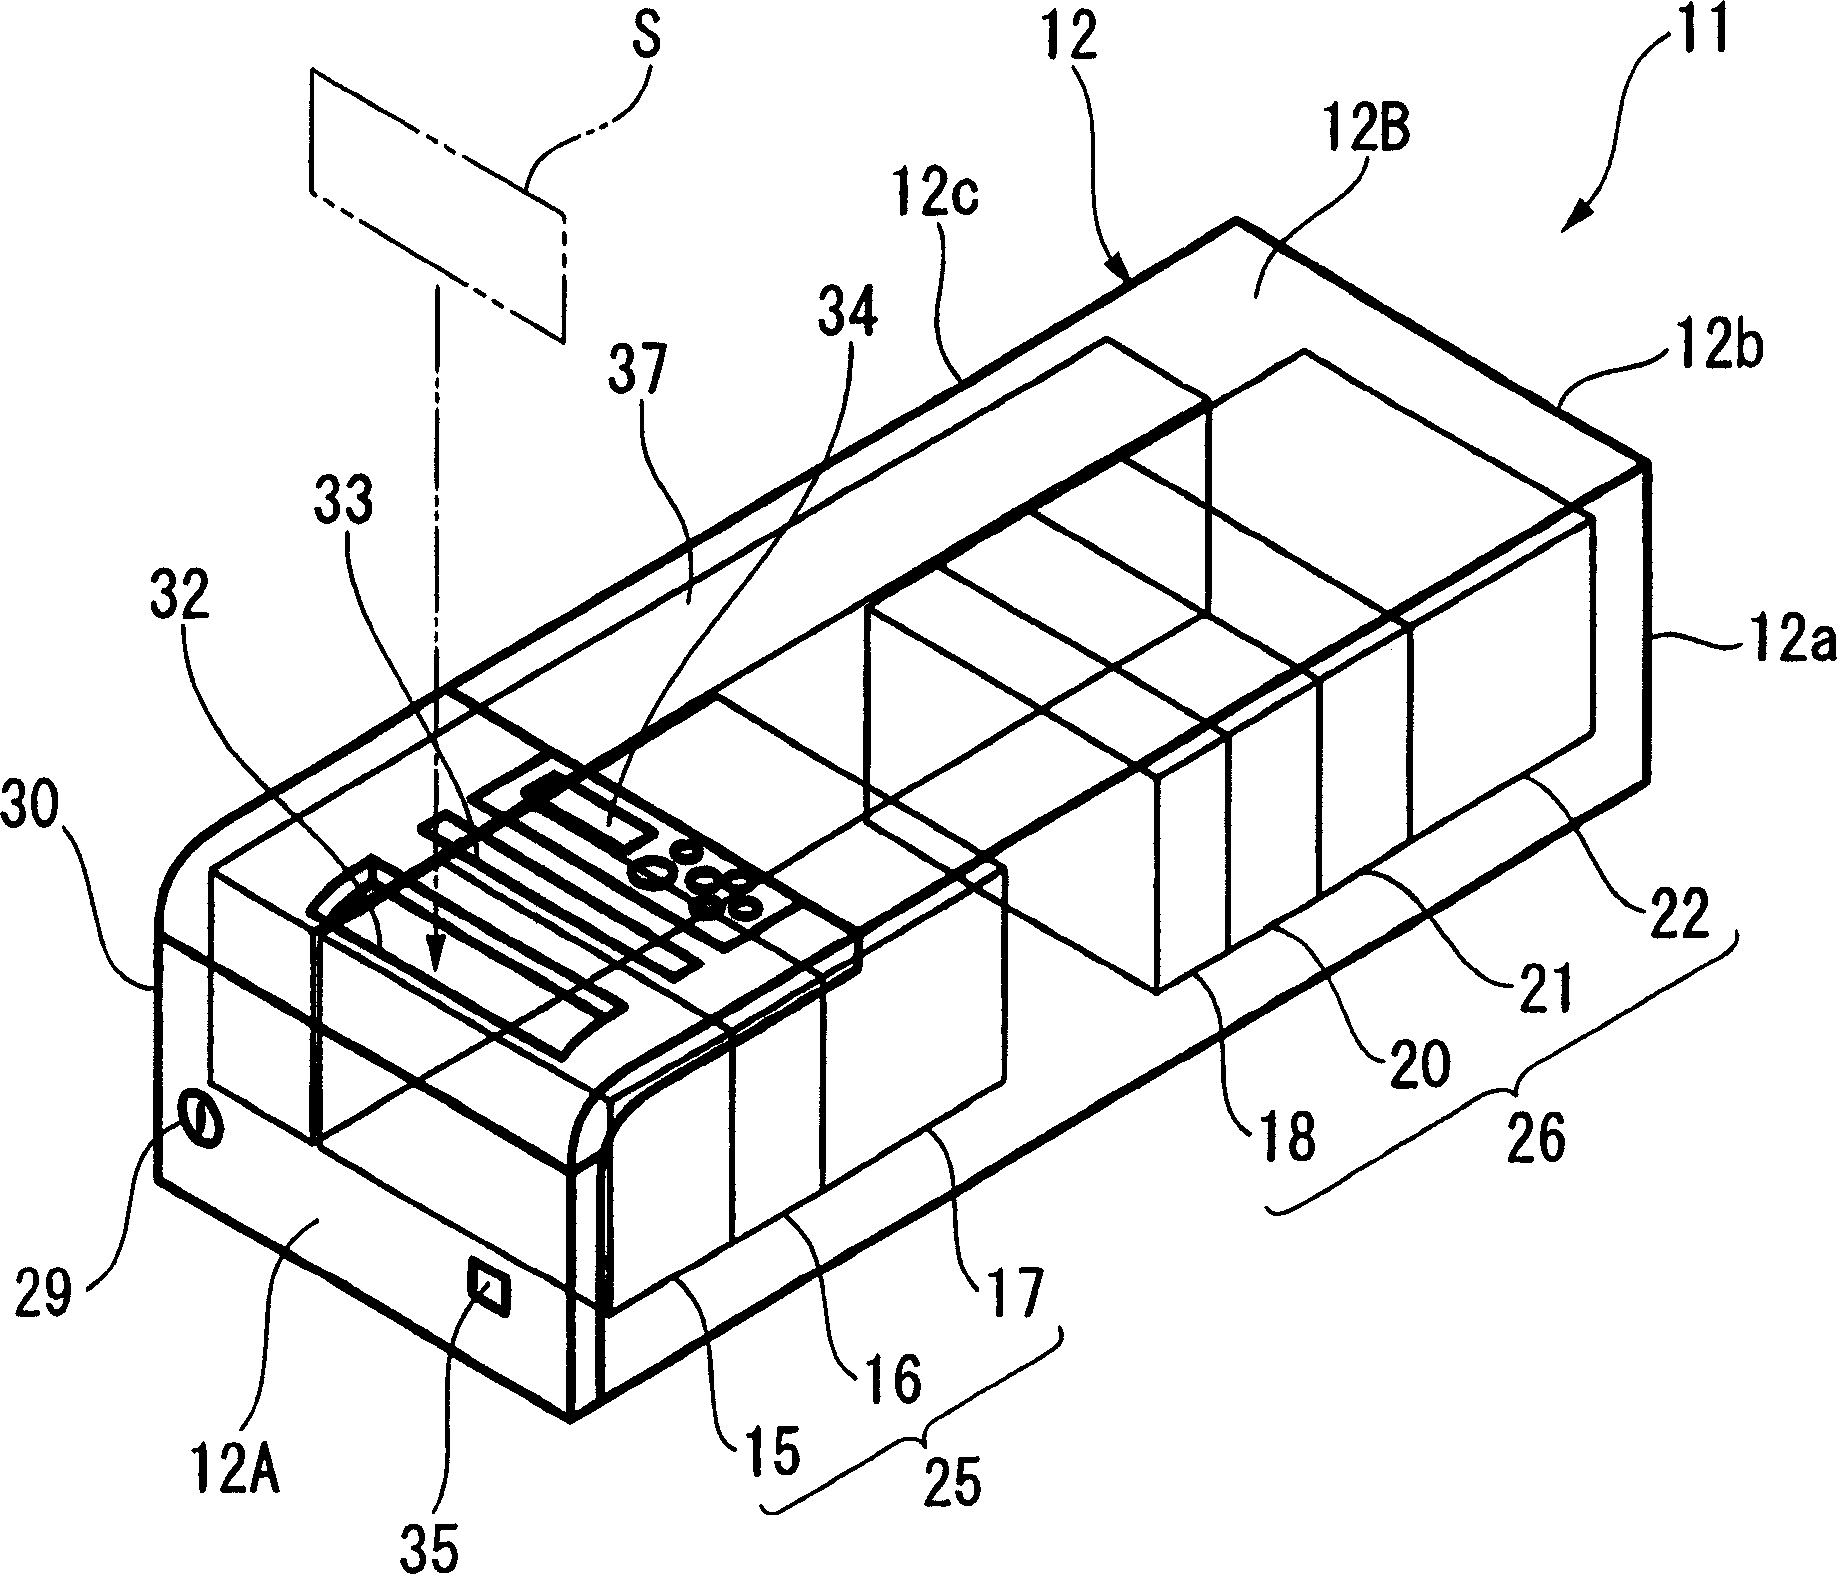 Paper money input and output device